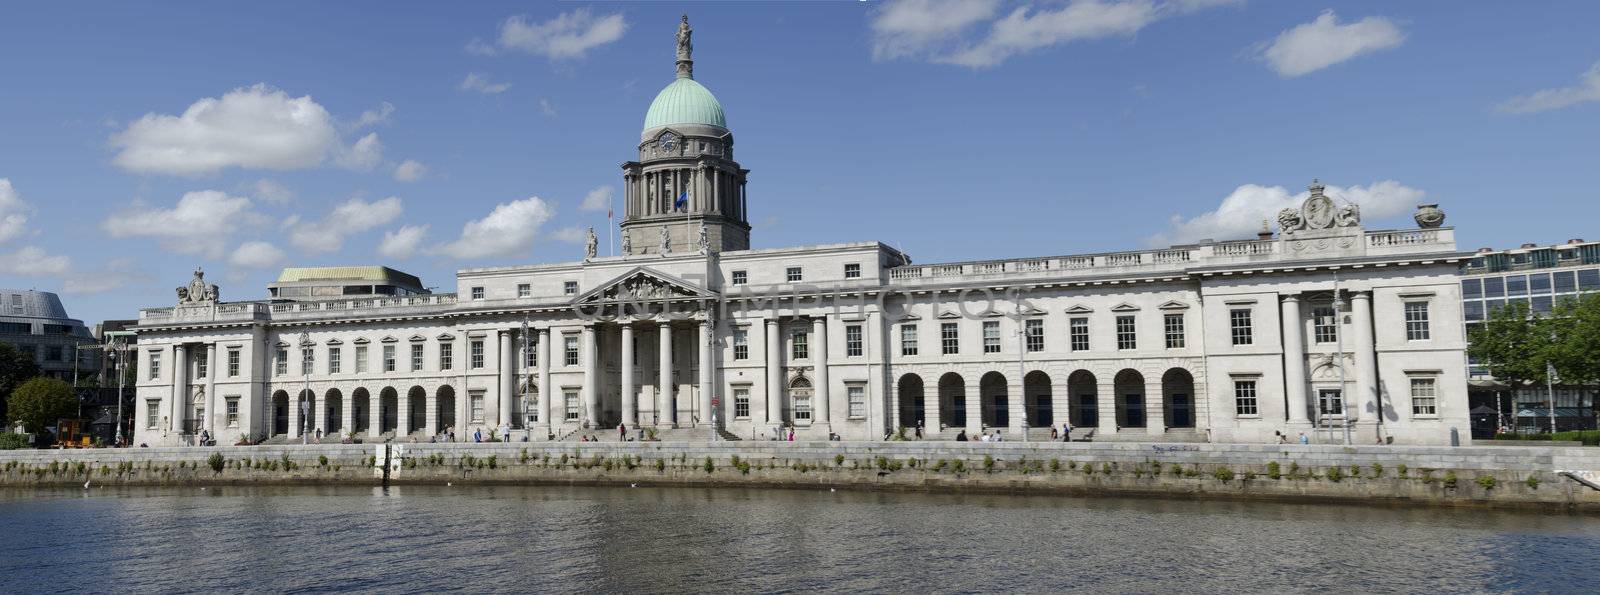 The Custom House (Irish: Teach an Chustaim) at river Liffey is a neoclassical 18th century building in Dublin, Ireland which houses the Department of the Environment, Heritage and Local Government.